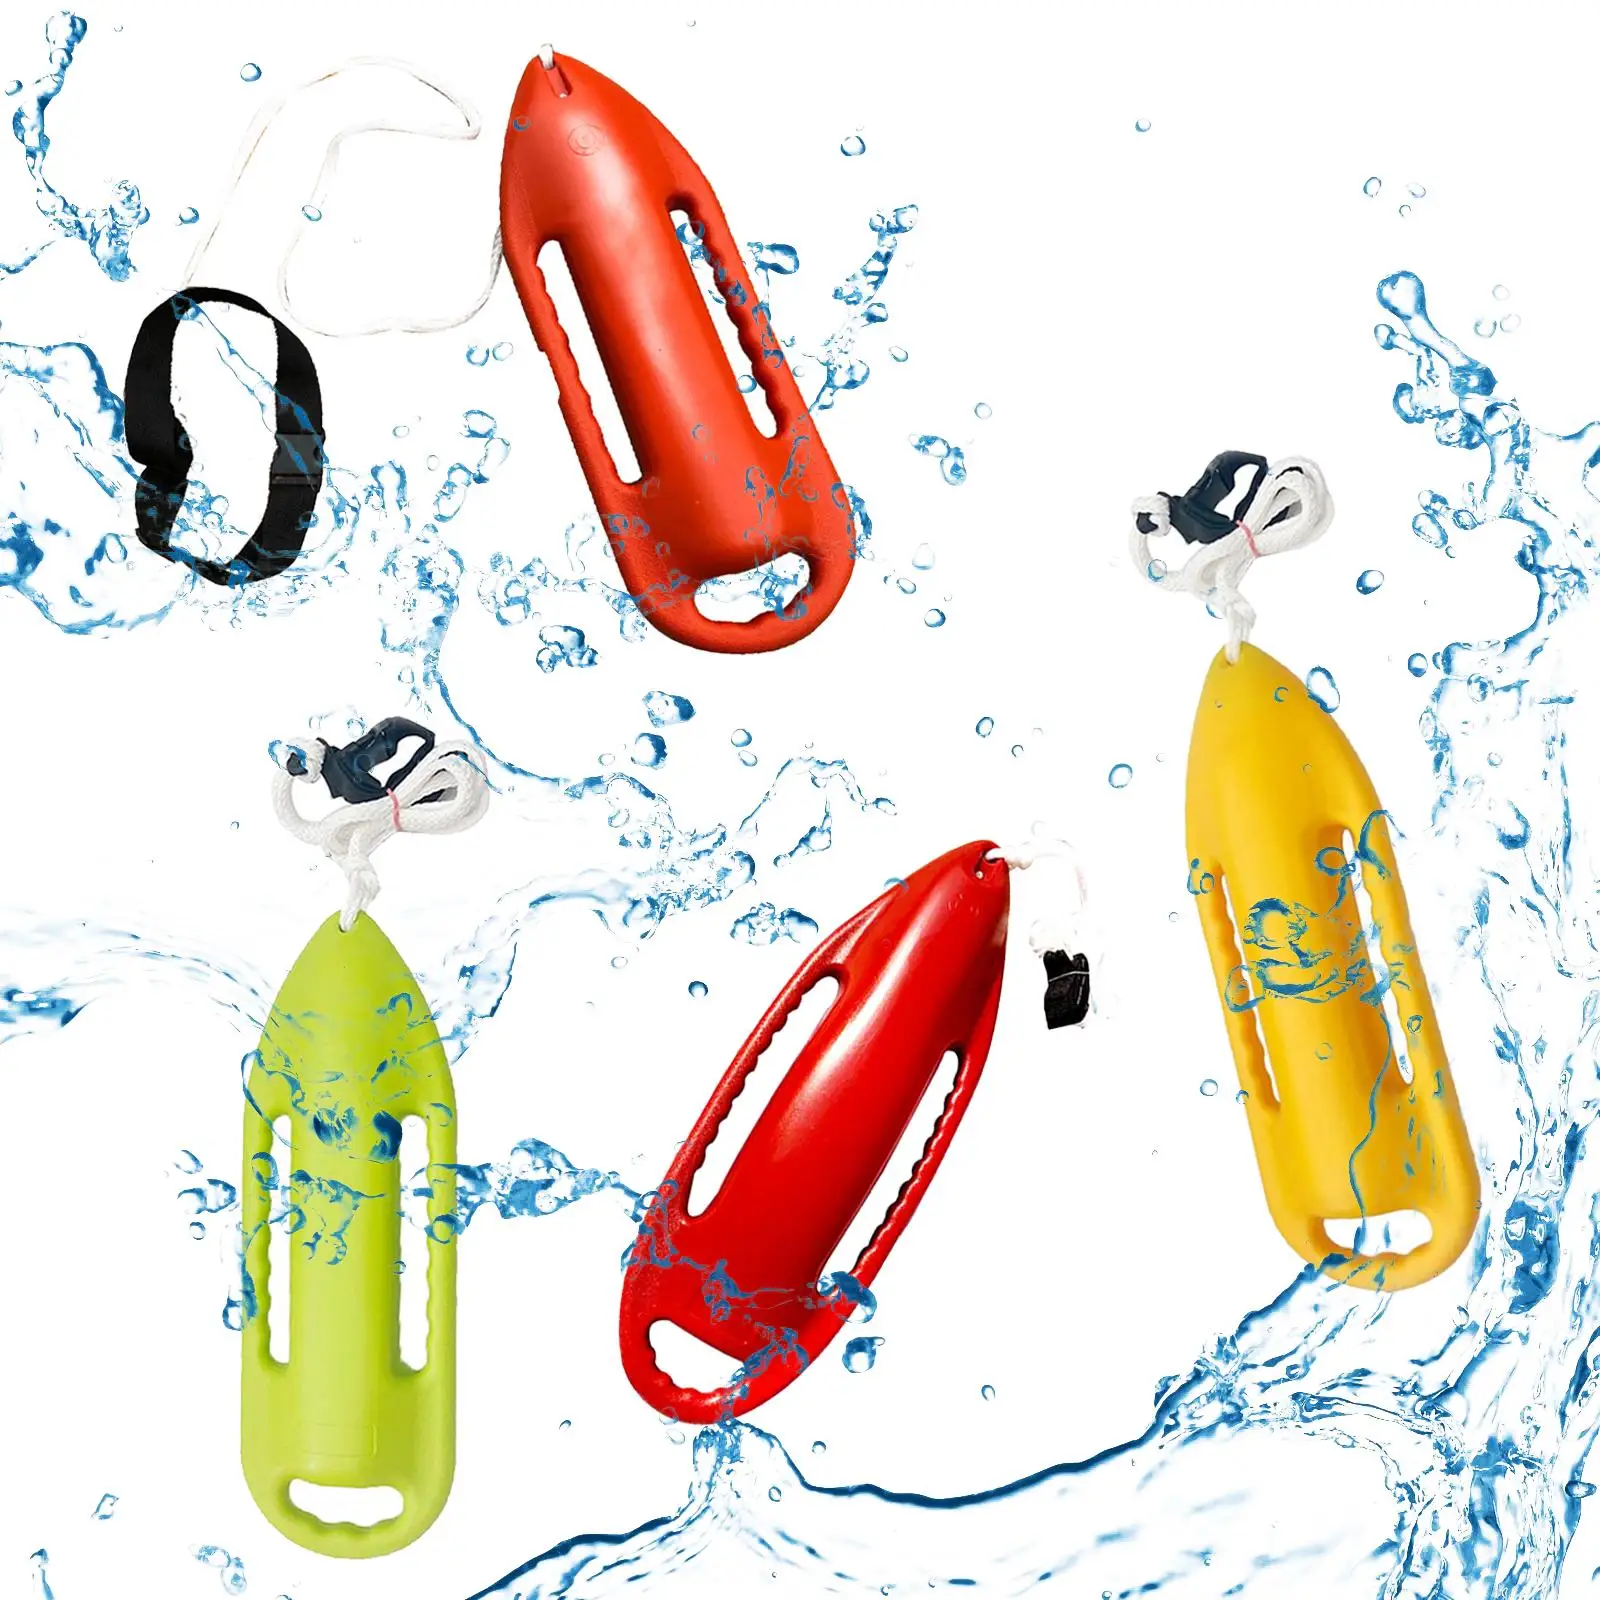 Portable Swimming Can Float Swimming Buoy for Floating Accessories Kayaking